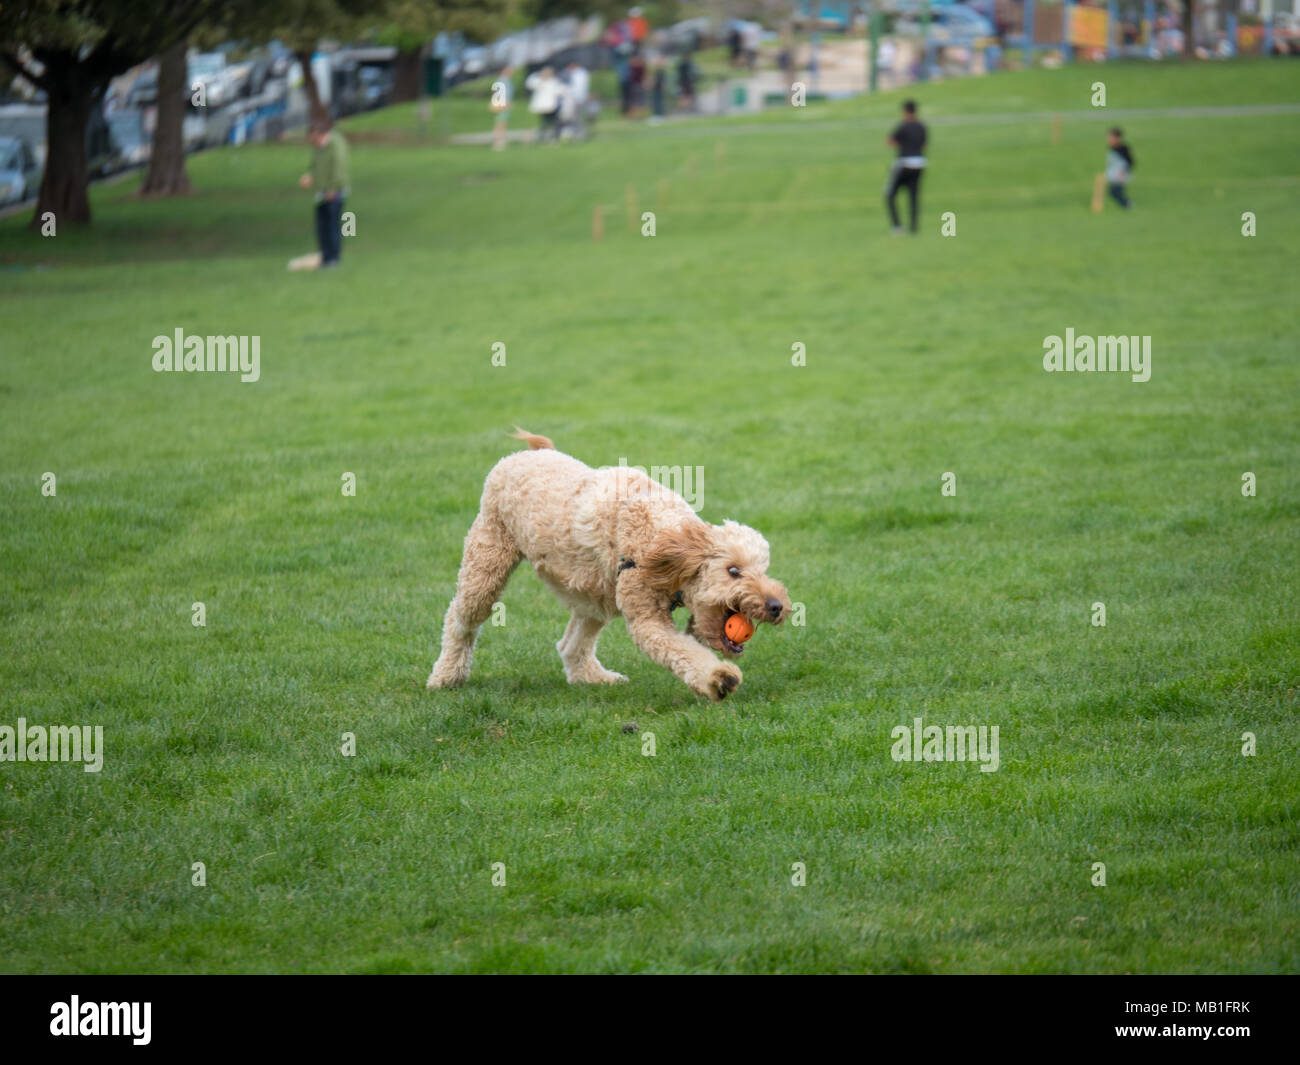 Golden doodle grabs ball while playing fetch at a park Stock Photo